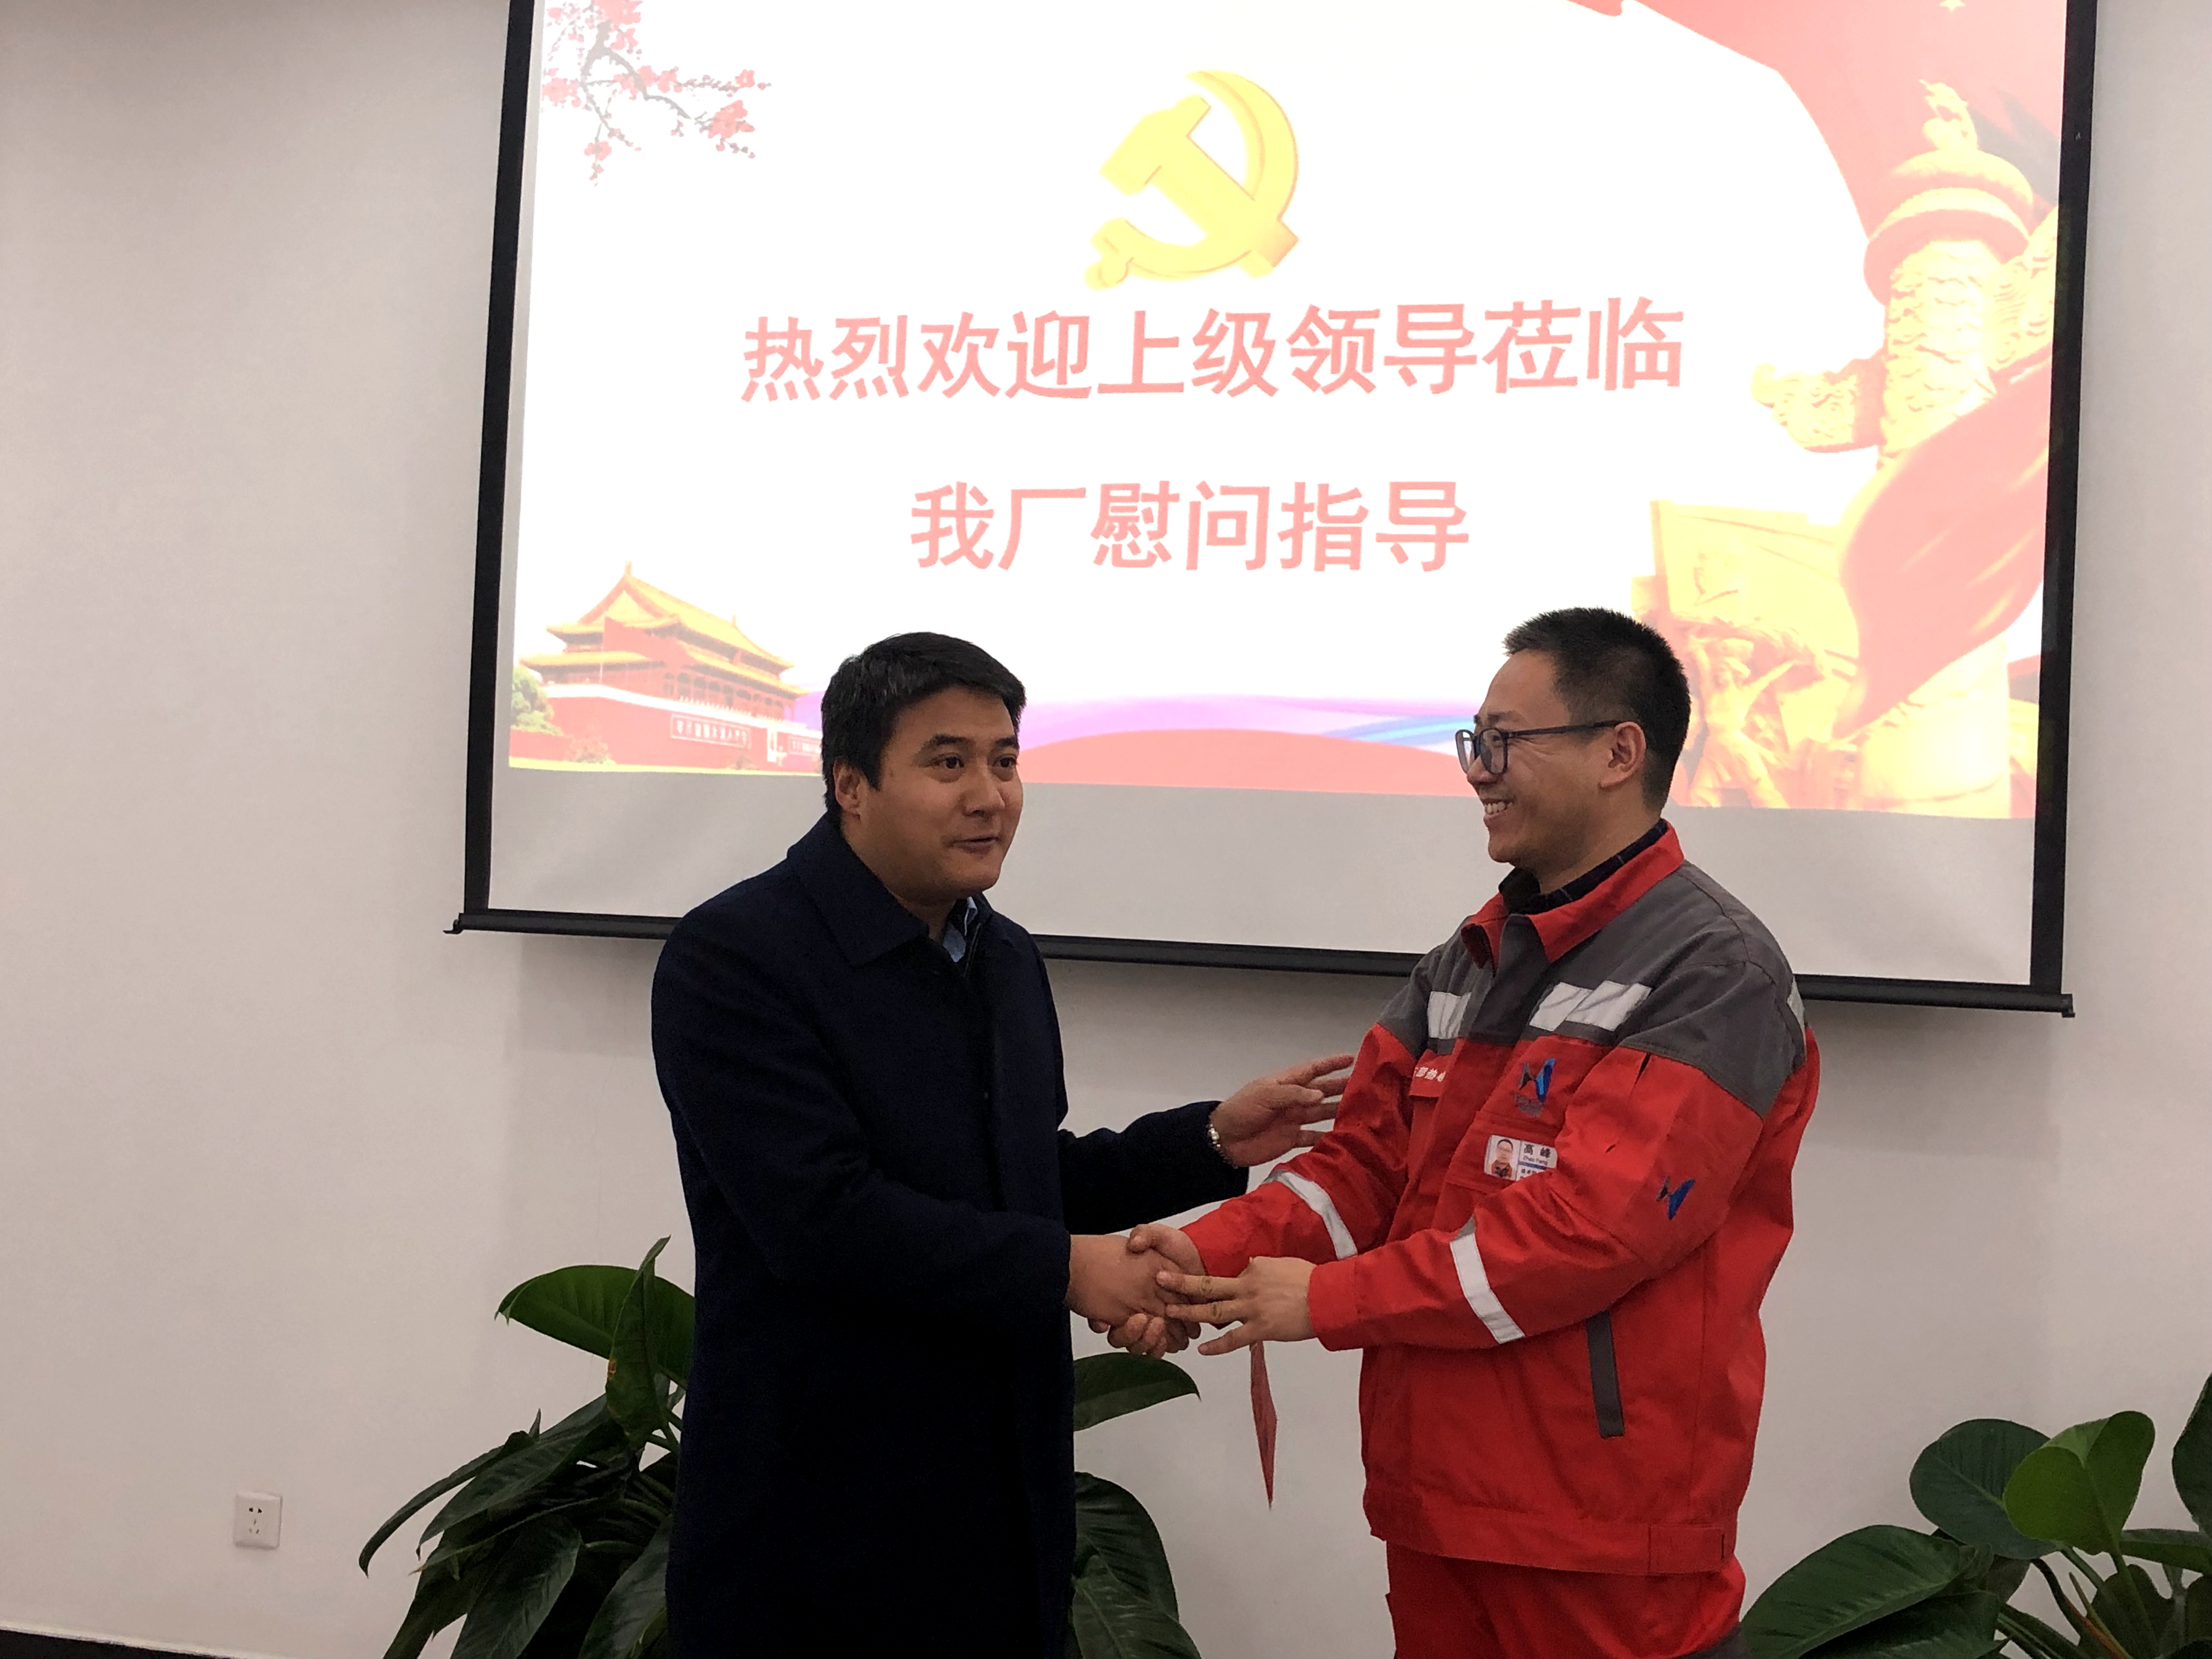 Xingqing District Standing Committee and Organizational Minister, Luo Yueqiang, visited the East Plant to consolation the production workers.